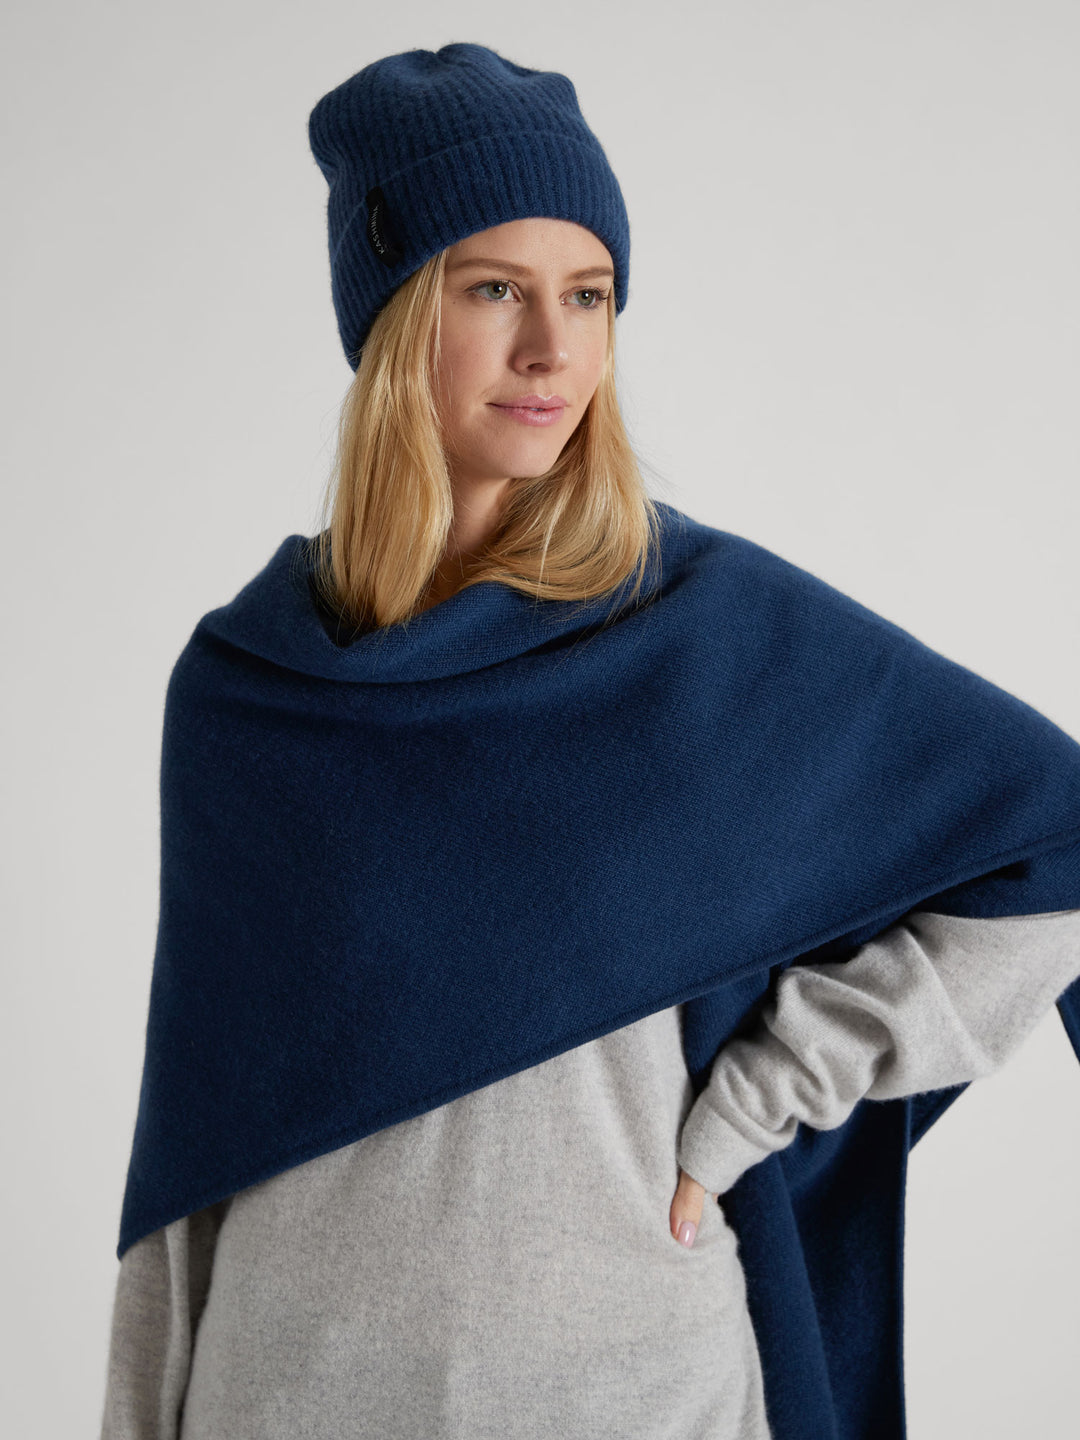 Cashmere scarf "Triangle" in 100% pure cashmere. Scandinavian design by Kashmina of Norway. Color: Mountain Blue.